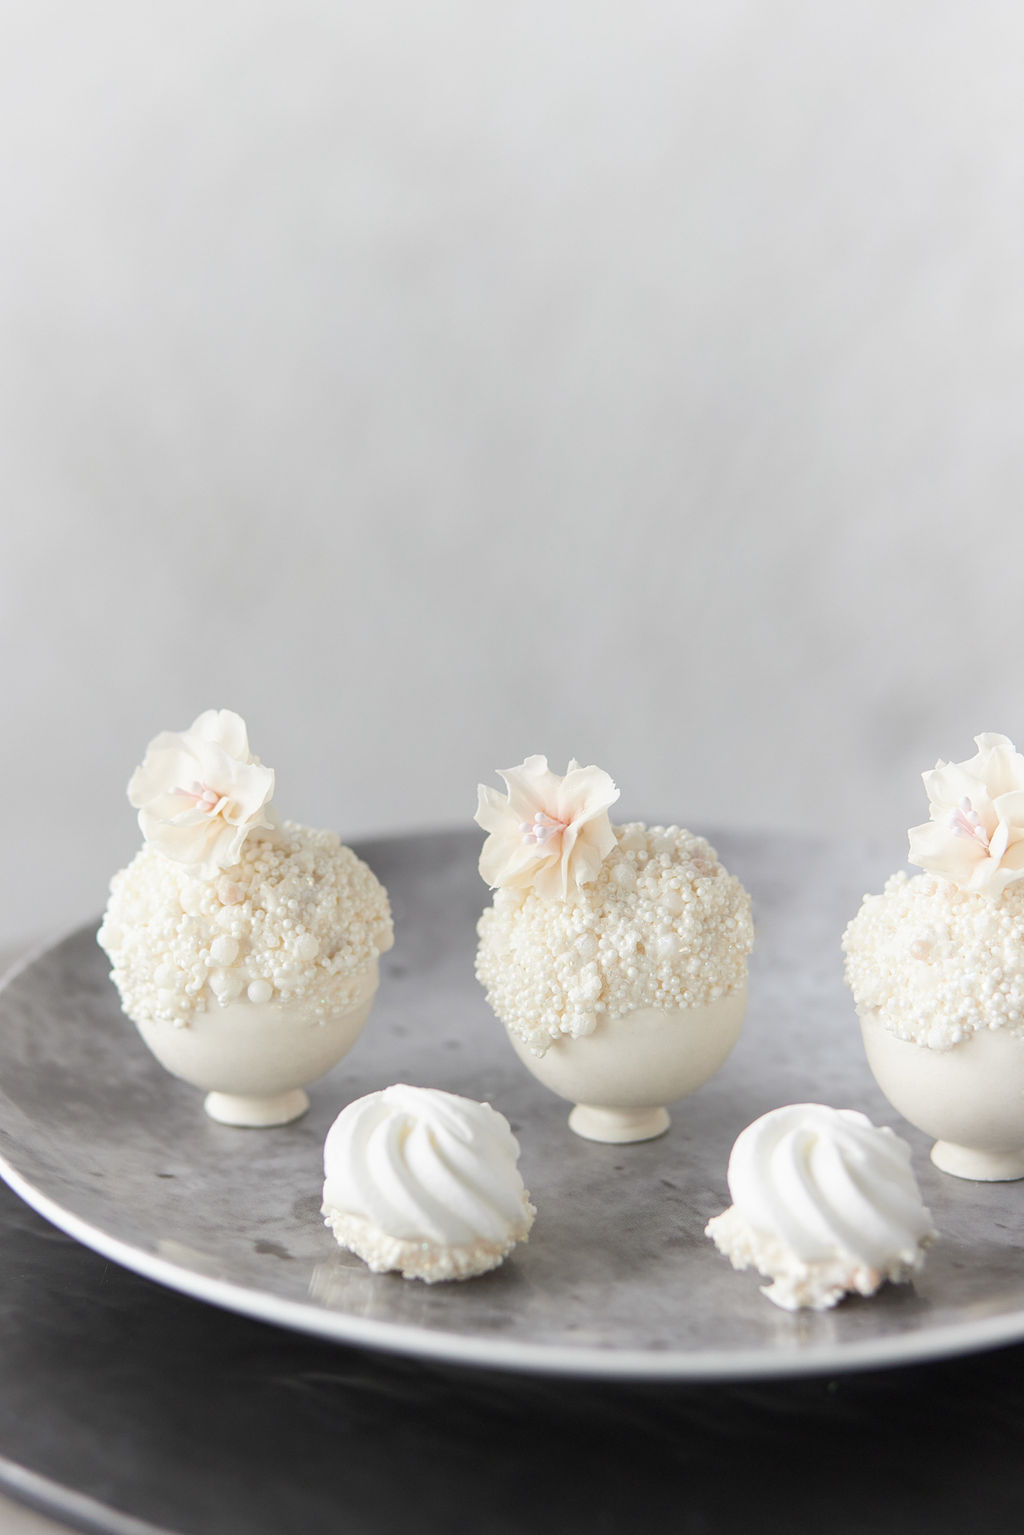 White chocolate-covered round truffles decorated with white sprinkles and white chocolate flowers